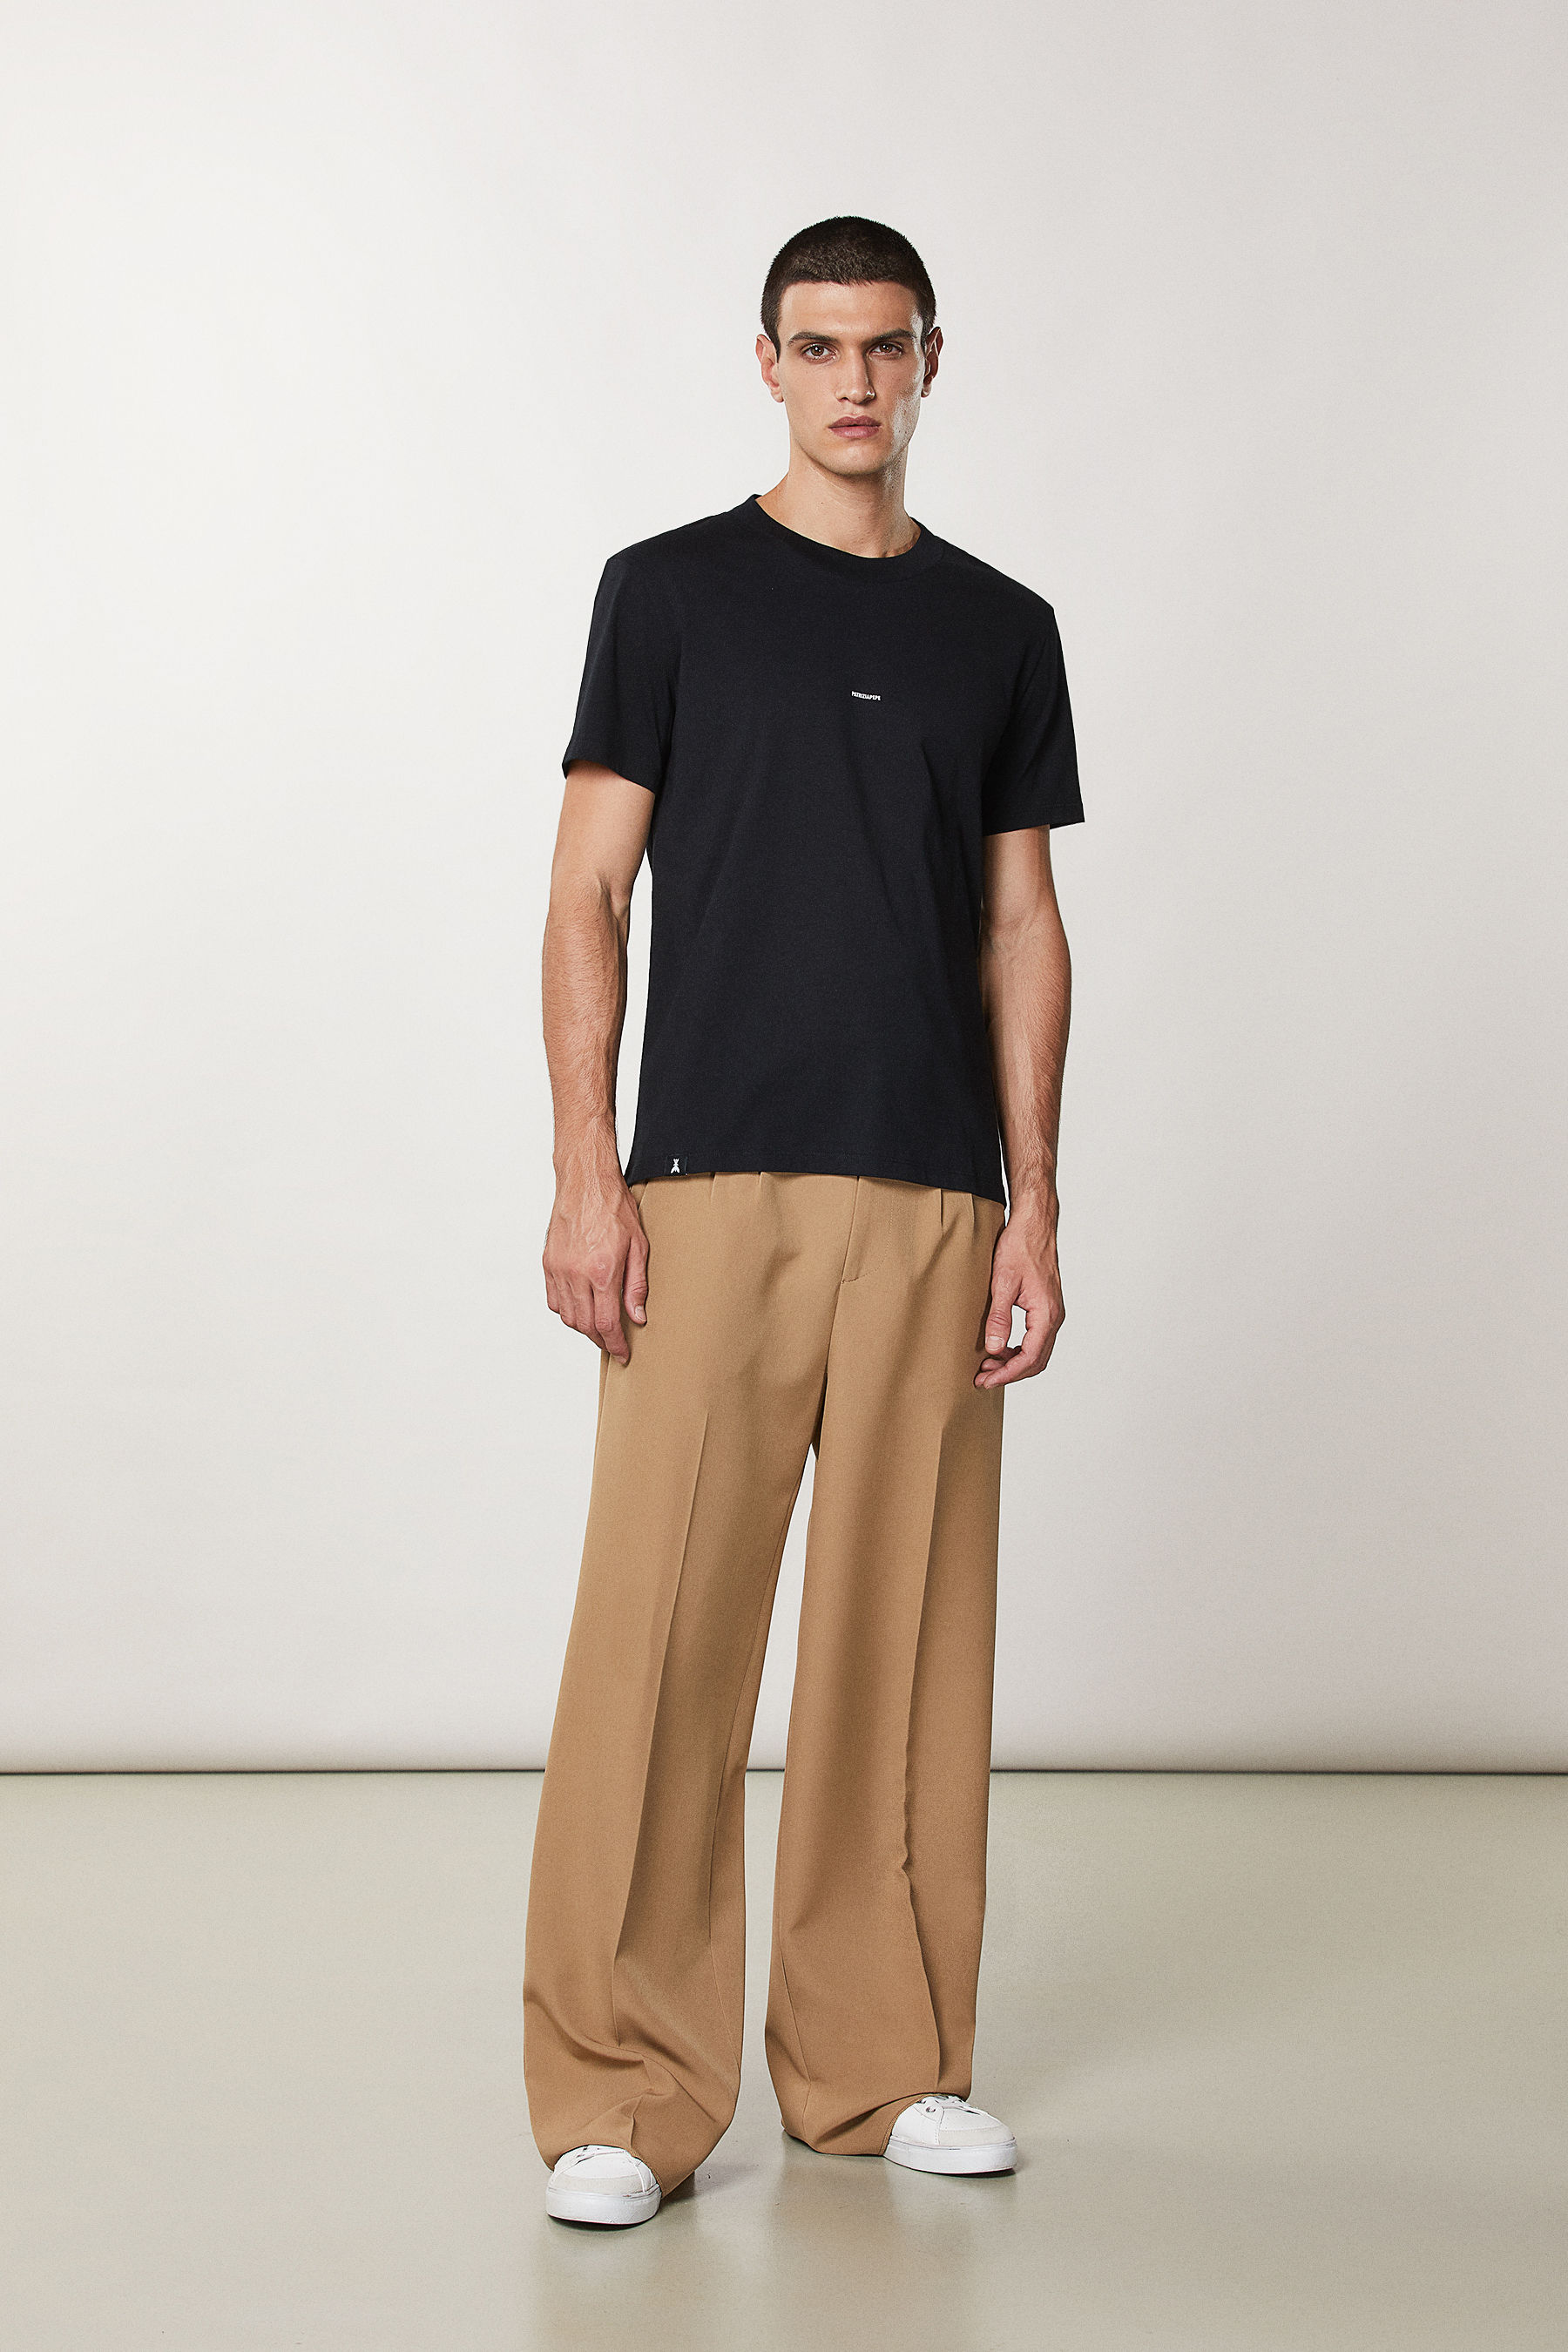 Women’s Luxe Jersey Volume Pant made with Organic Cotton | Pact